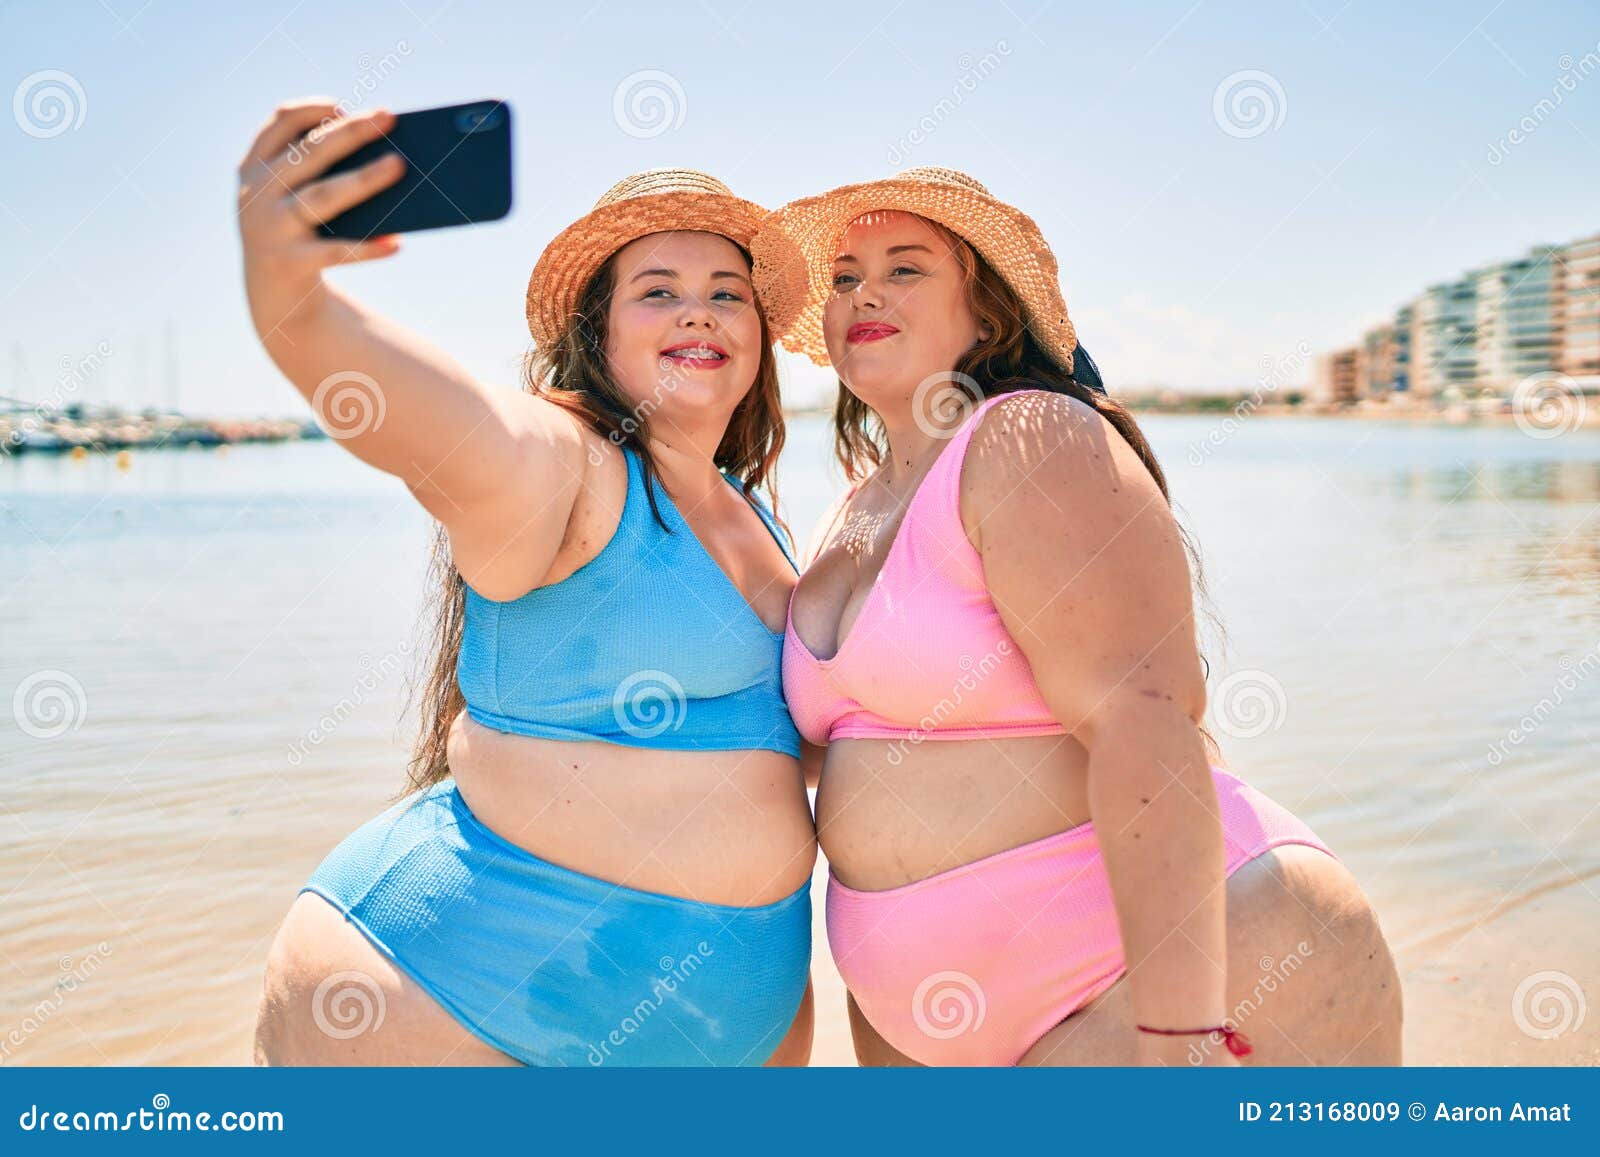 tilfældig Justering effektivitet Two Plus Size Overweight Sisters Twins Women Happy Taking a Selfie Picture  at the Beach on Summer Holidays Stock Image - Image of belly, positive:  213168009